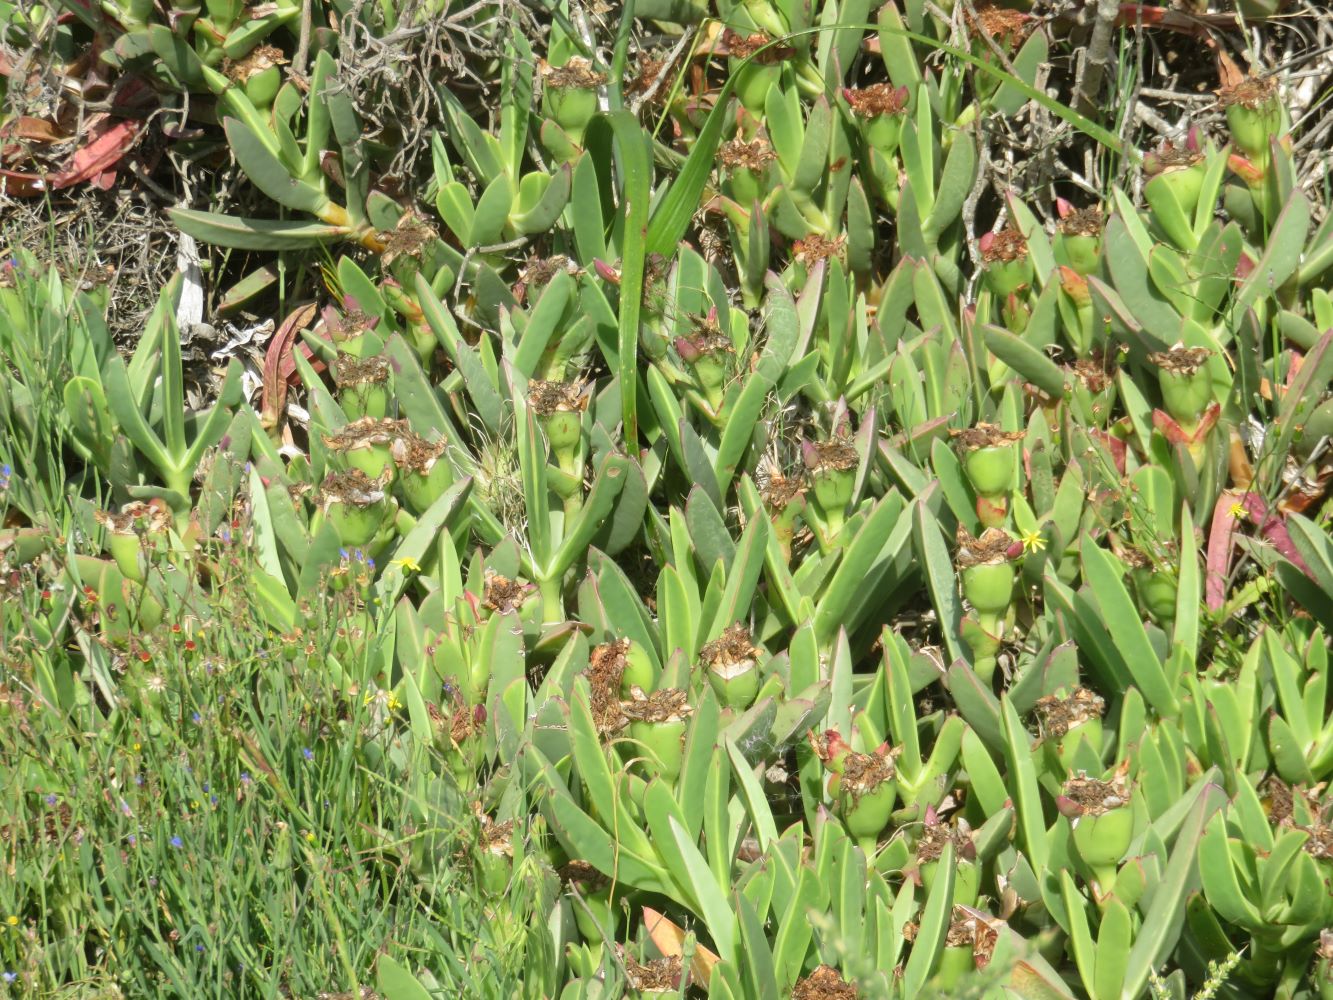 Carpobrotus: Oodles of green fruit that will ripen to delight animals and humans with their slimy, slurpy, salty, seedy hearts.